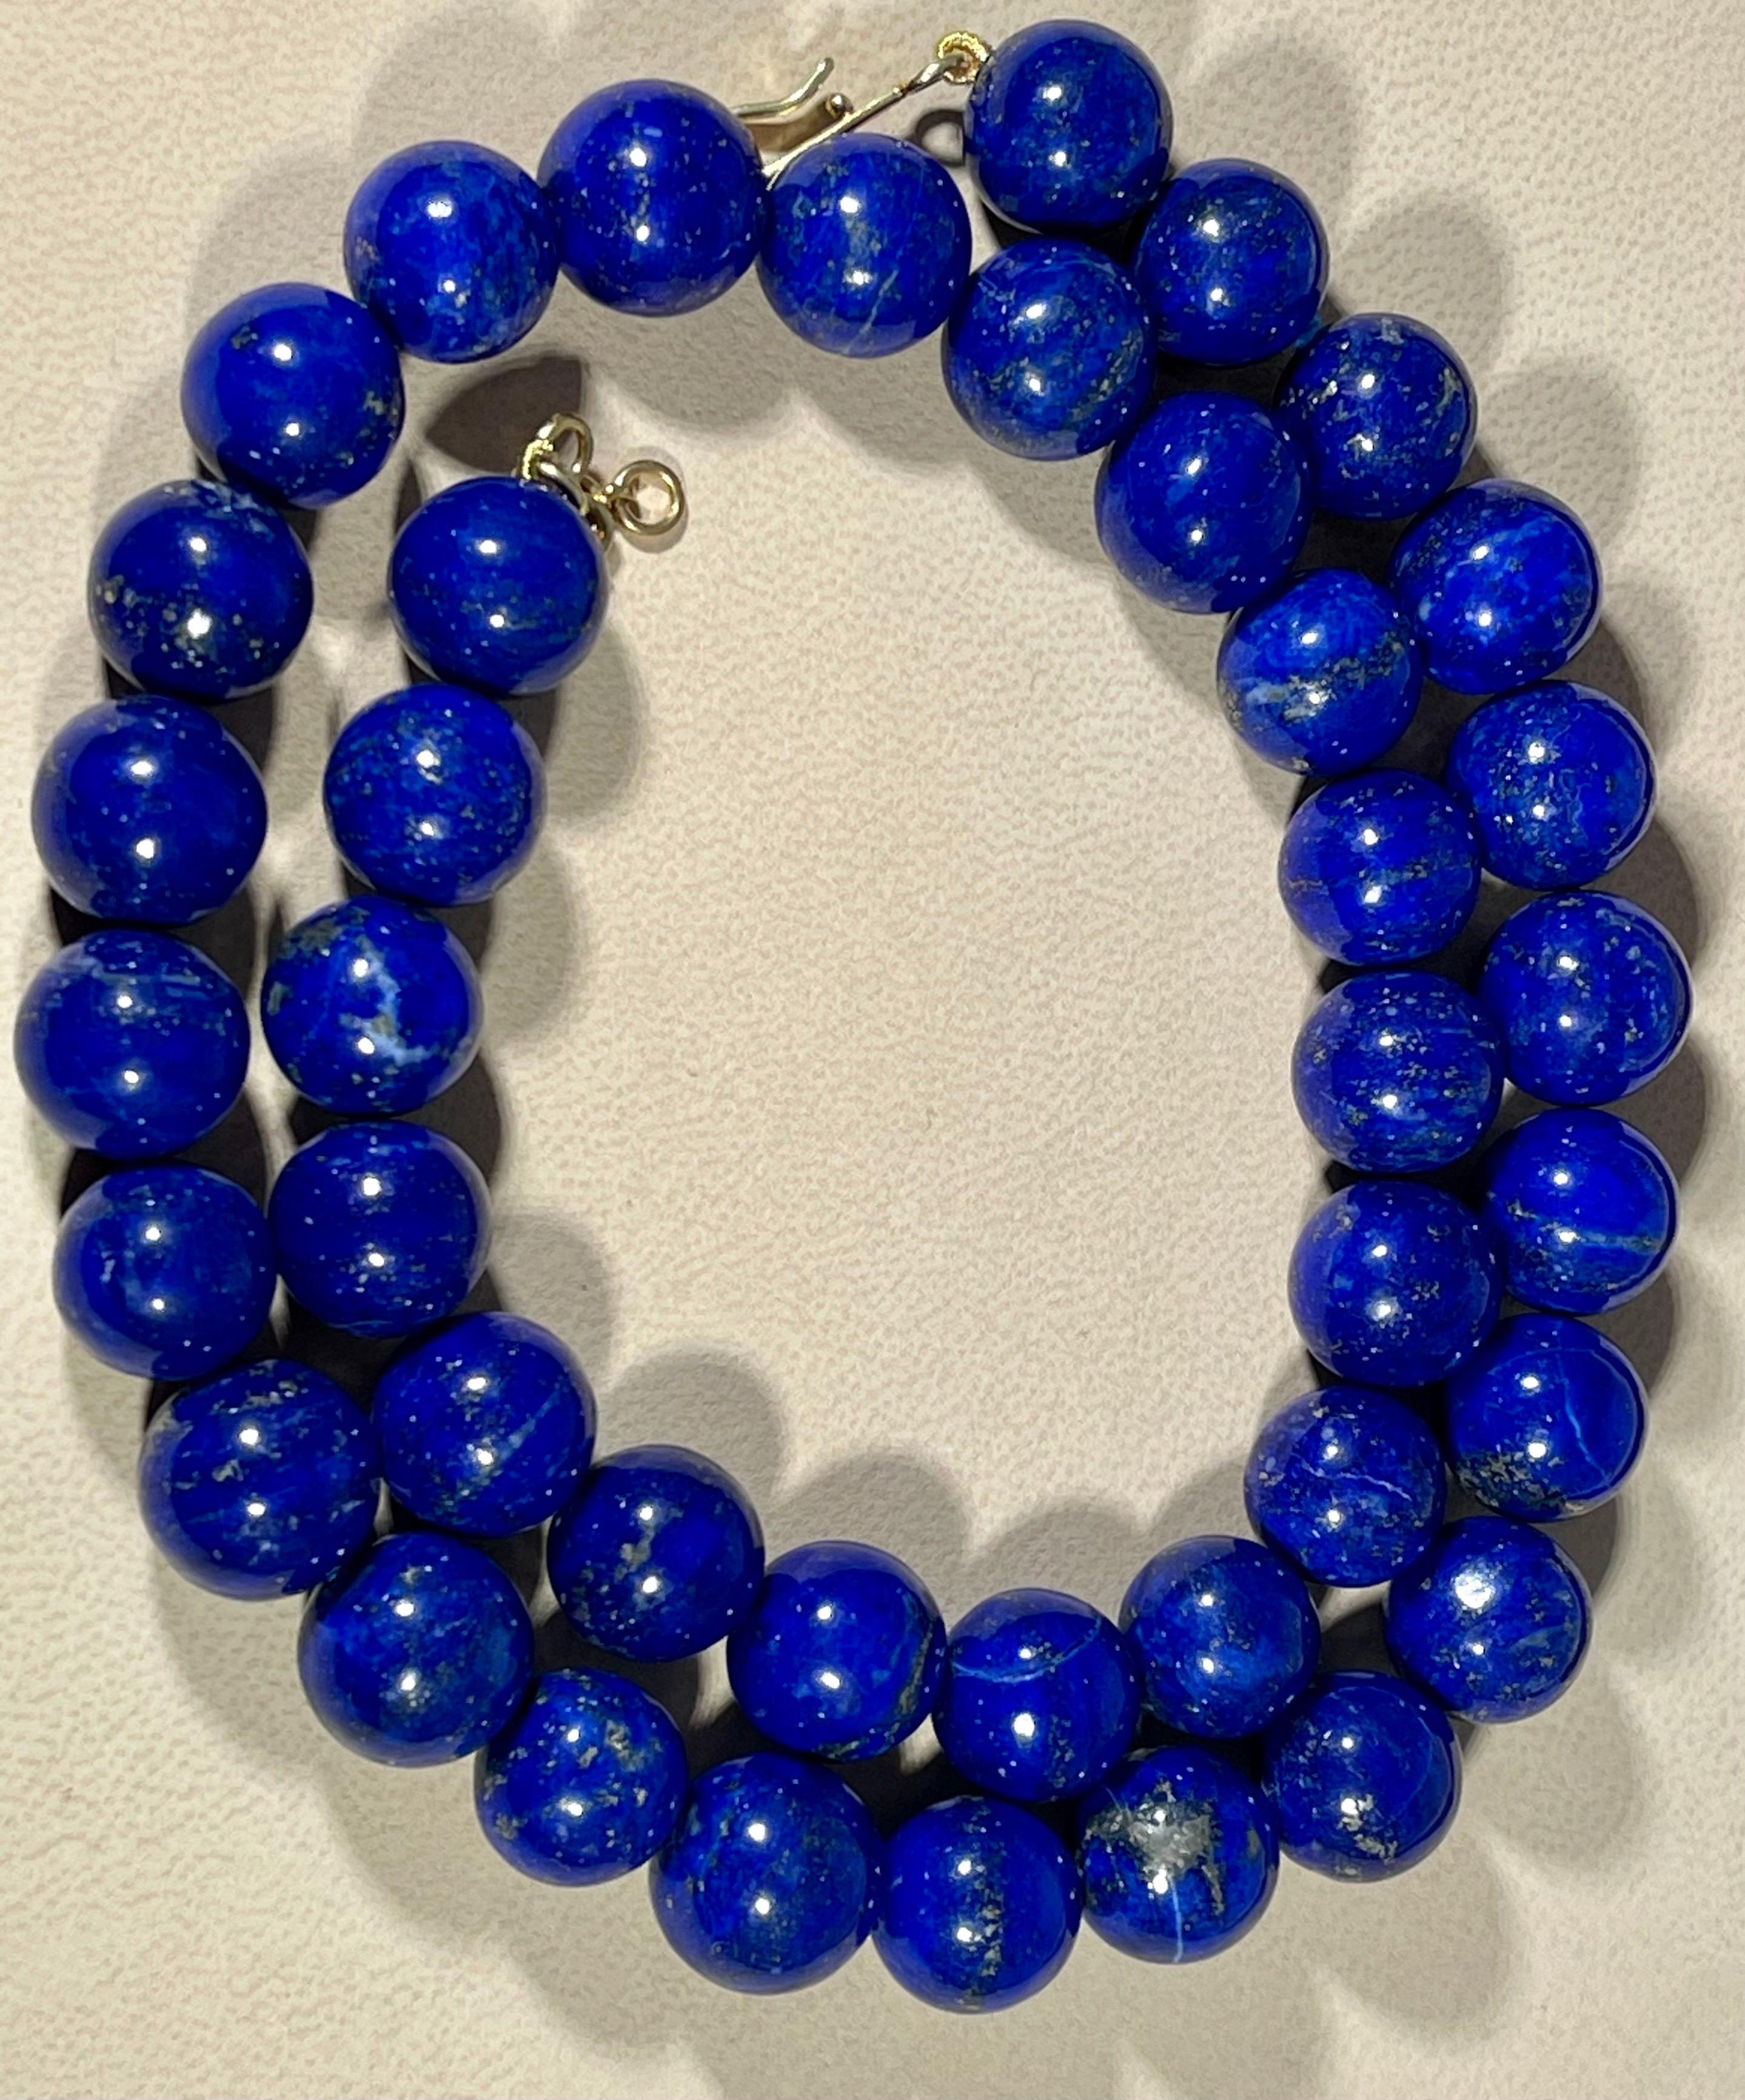 Women's Vintage Lapis Lazuli Single Strand Necklace with 14 Karat Yellow Gold Lobster For Sale